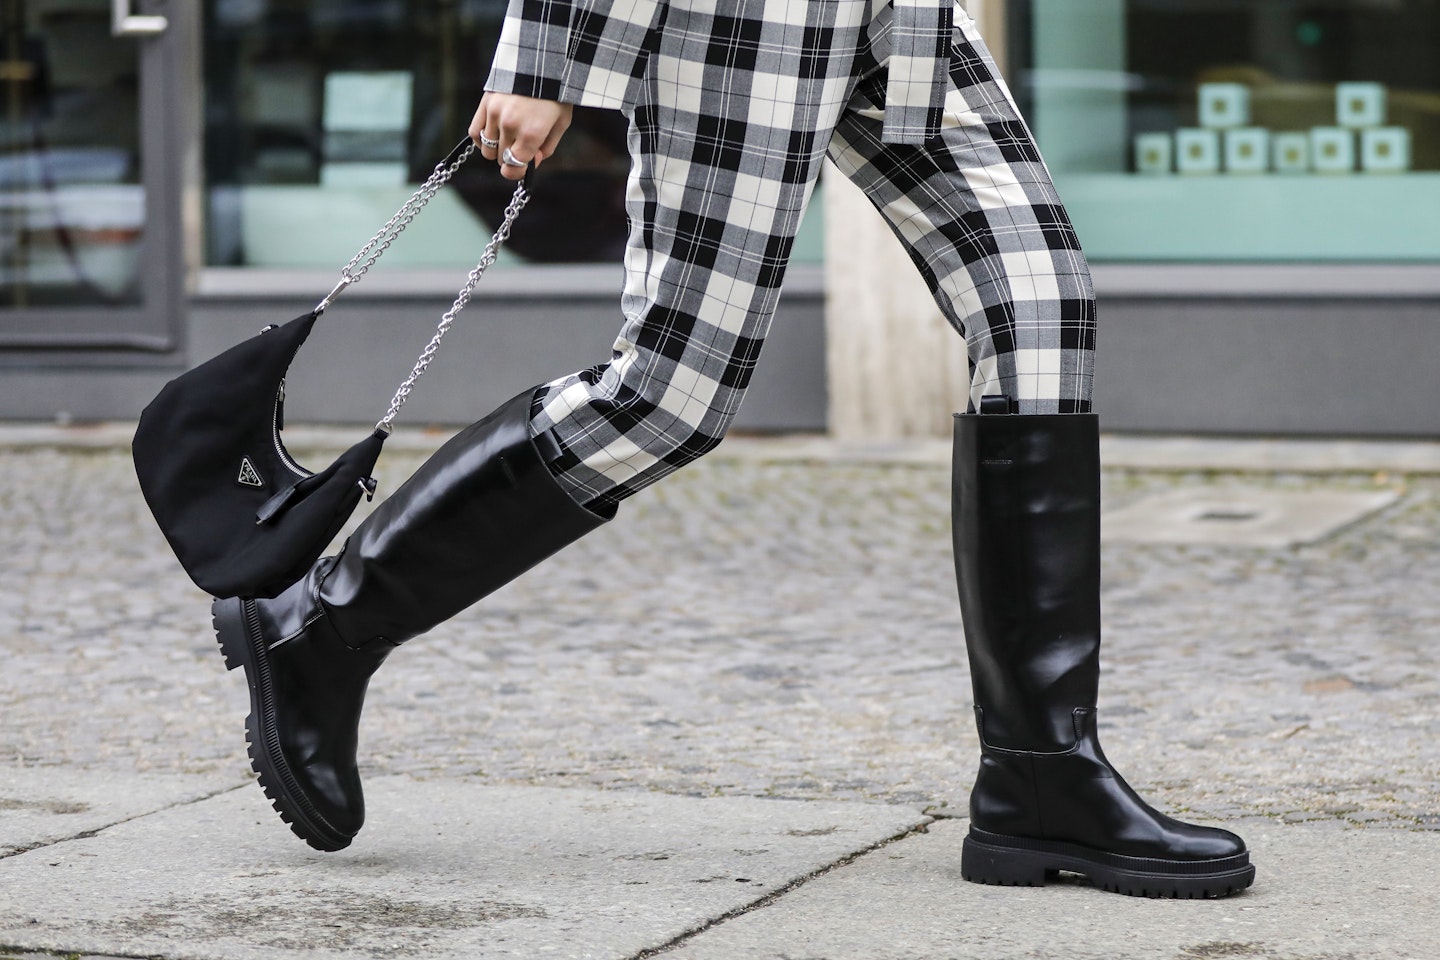 Knee-high boots are going nowhere according to street stylers